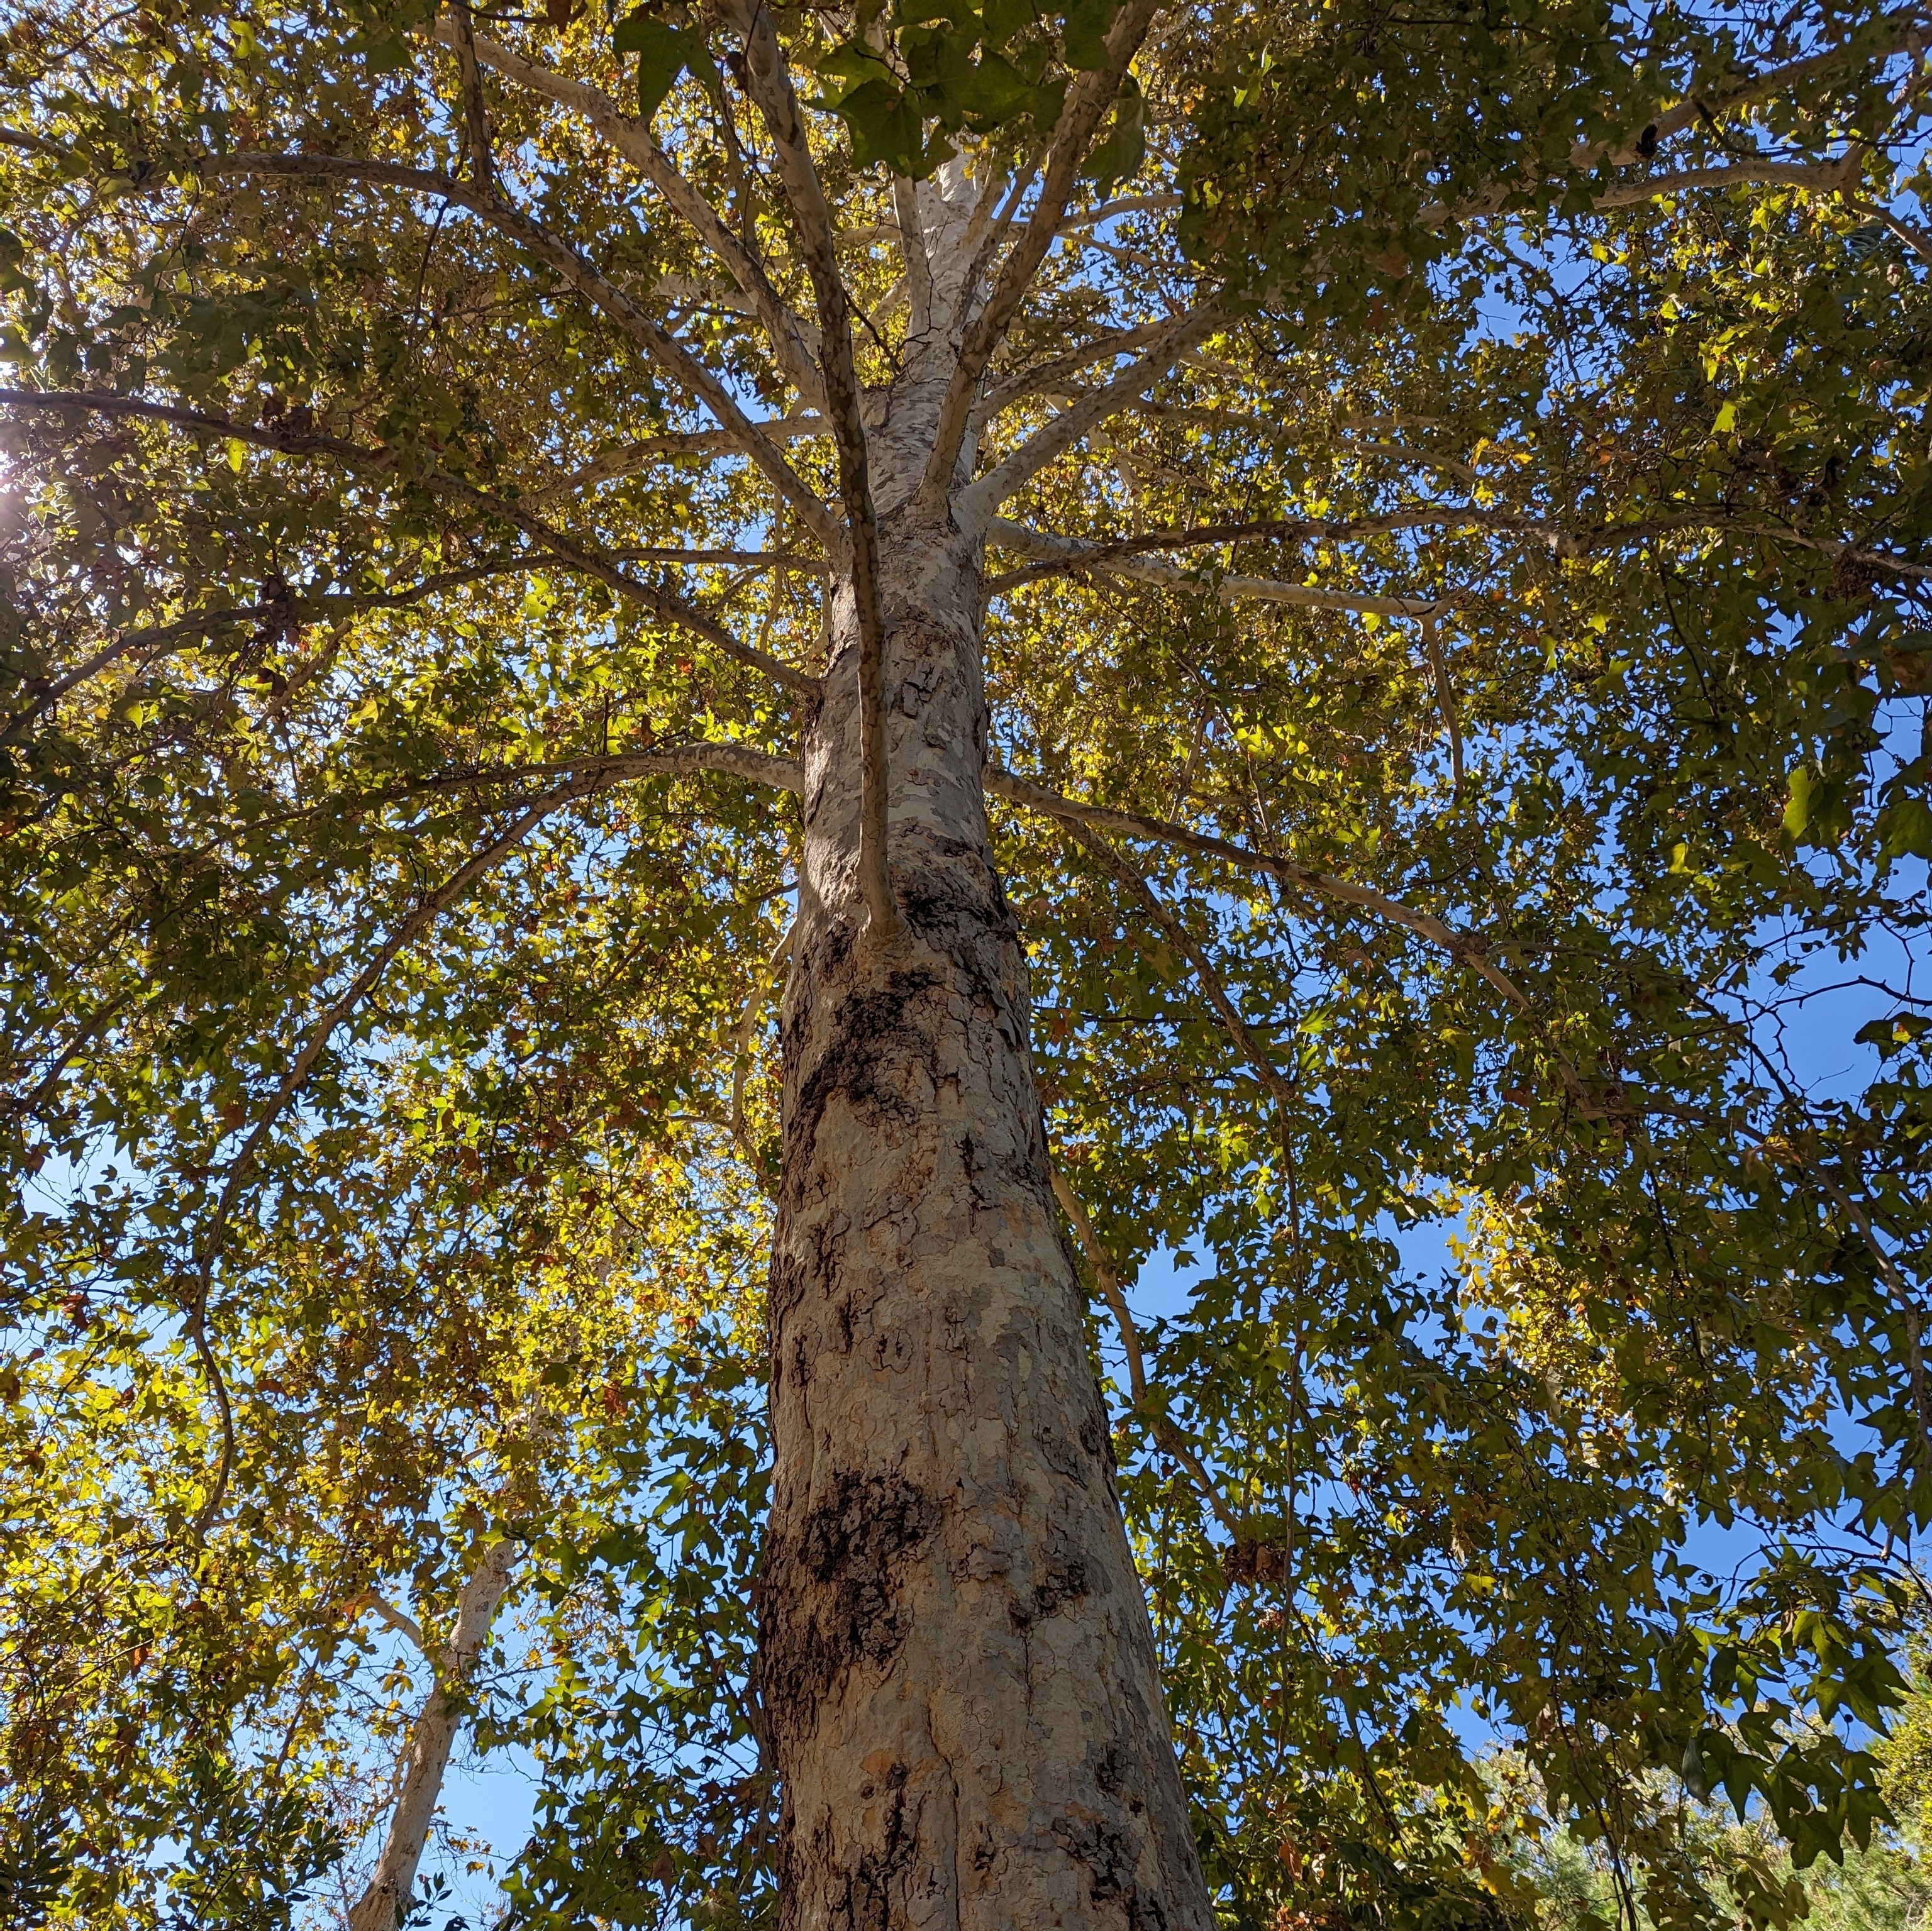 Image of a large sycamore tree